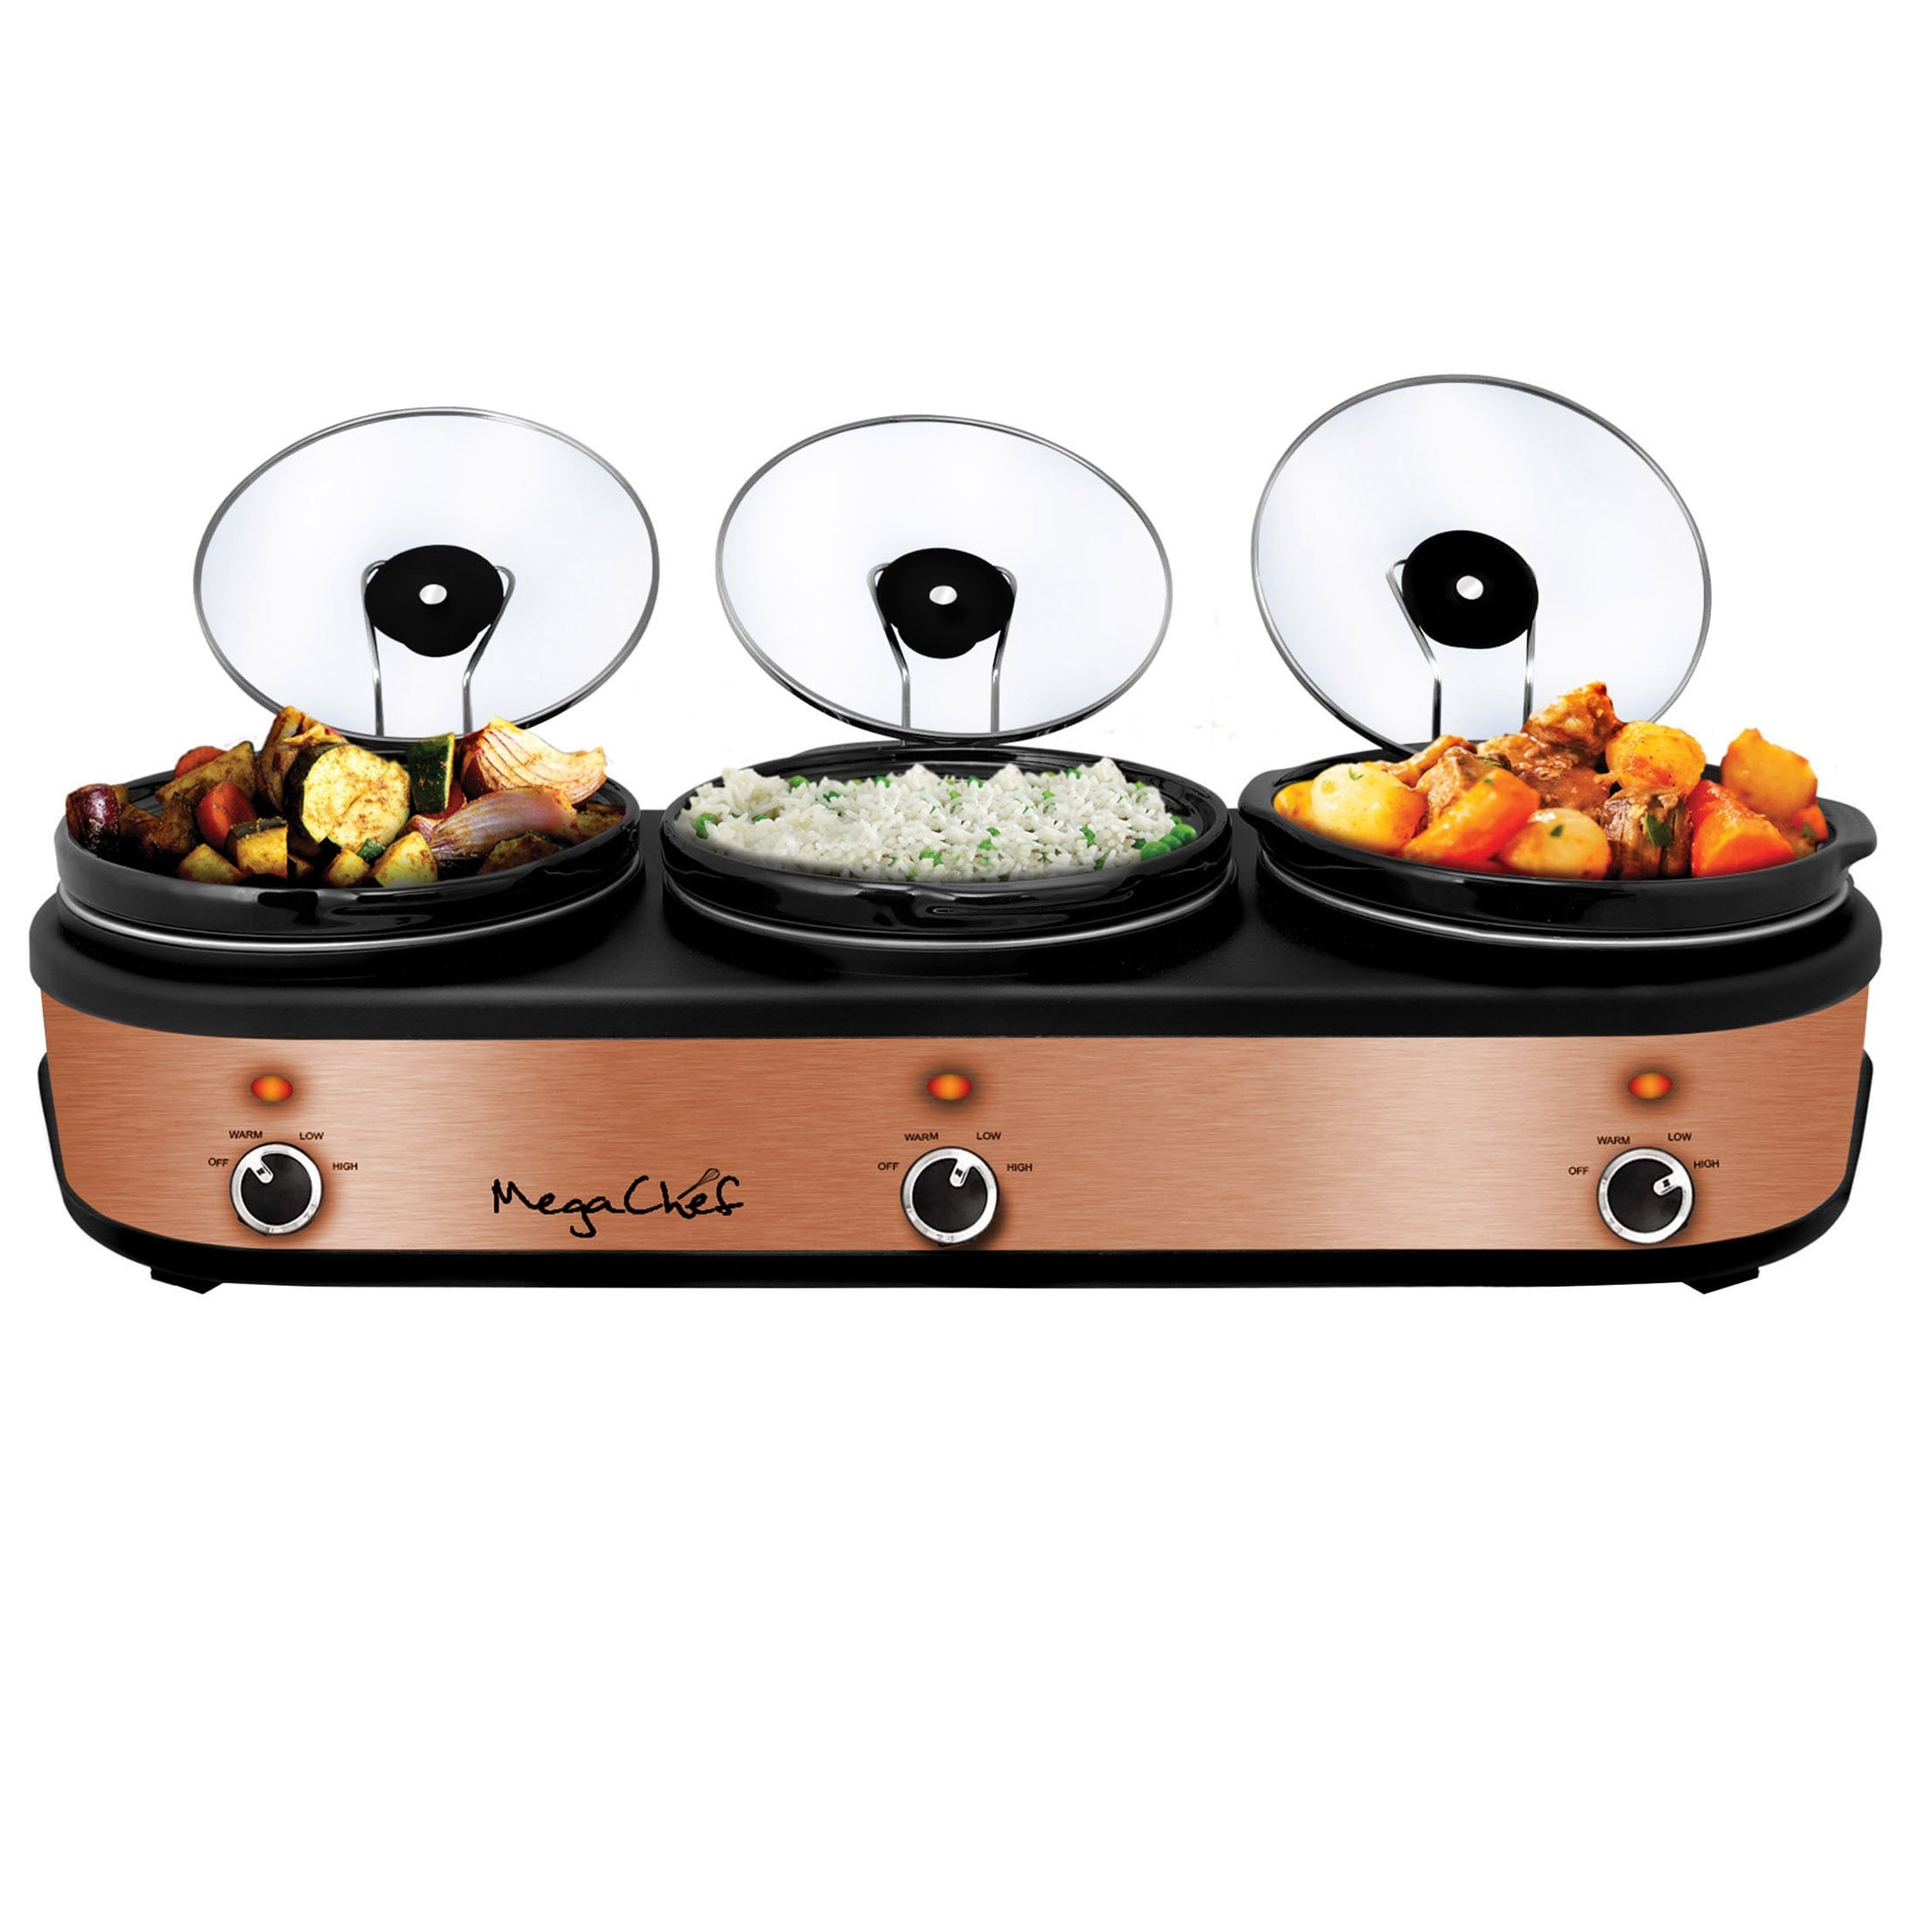 Royalcraft Double Slow Cooker,2 Pot Small Mini Crock Buffet Servers and  Warmer,Dual Pot Oval Manual Slow Cooker with Adjustable Temp Removable  Ceramic